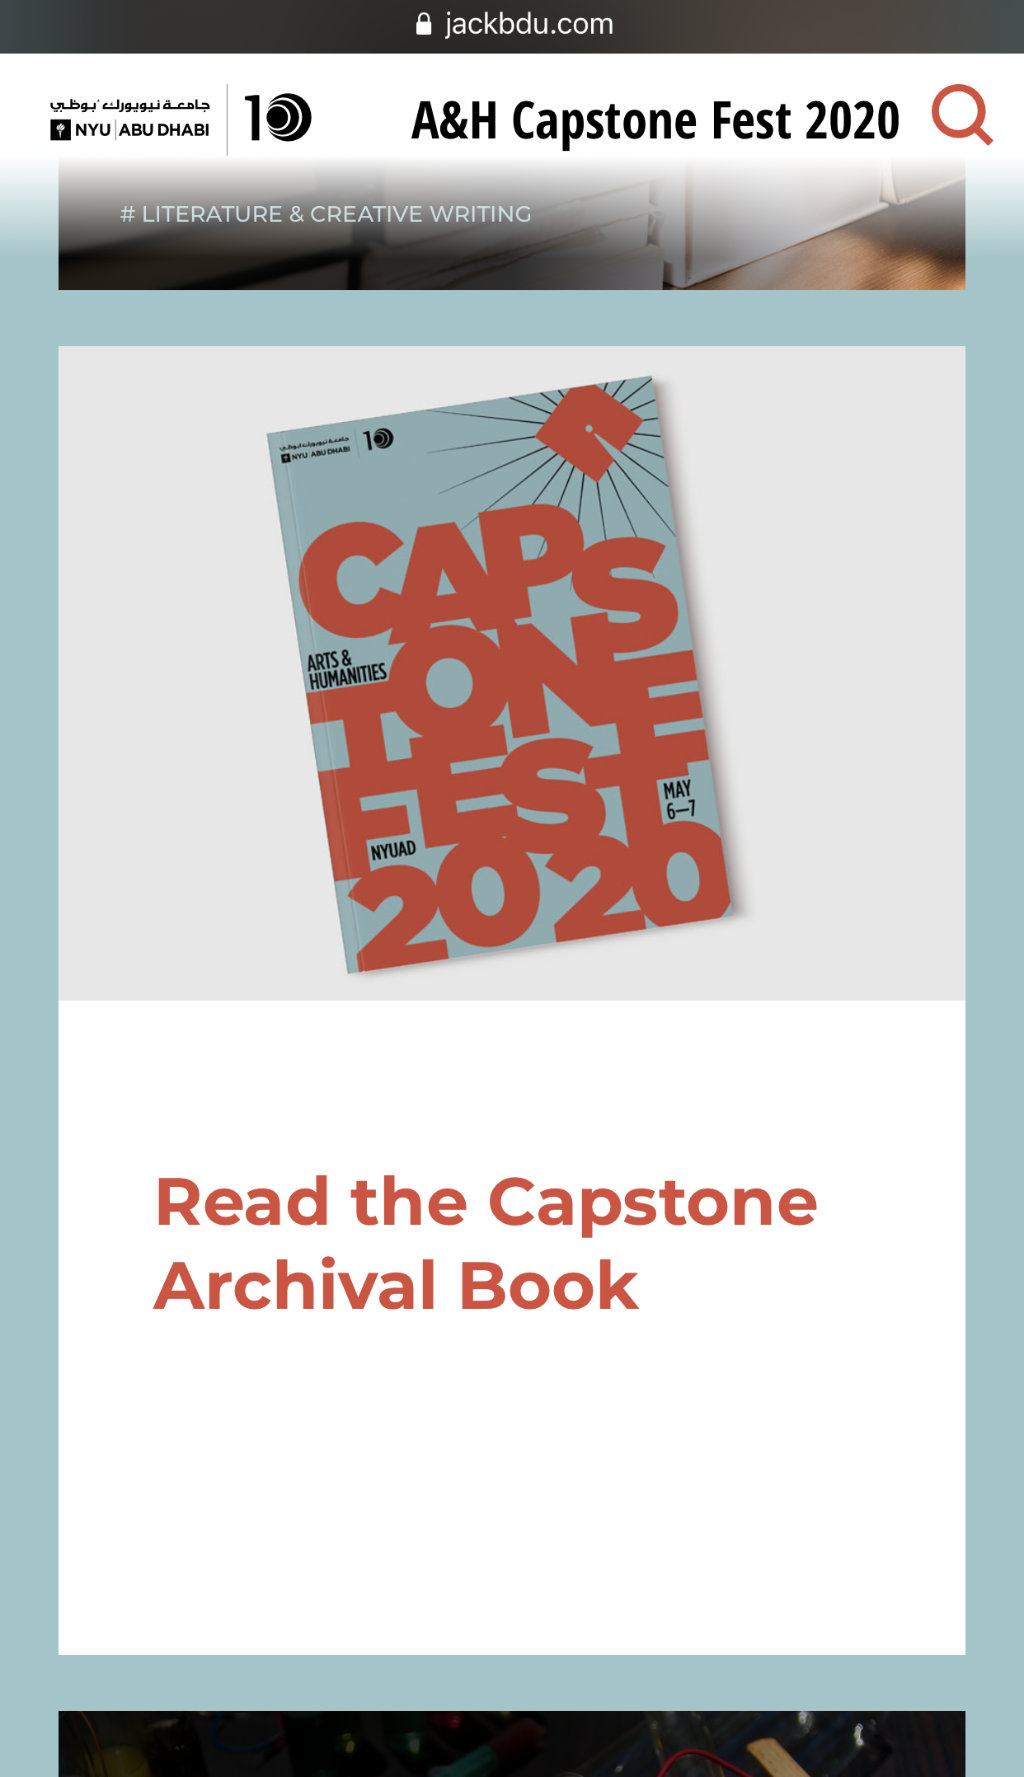 Screenshot of Capstone Festival Website's book tile displayed in a mobile browser